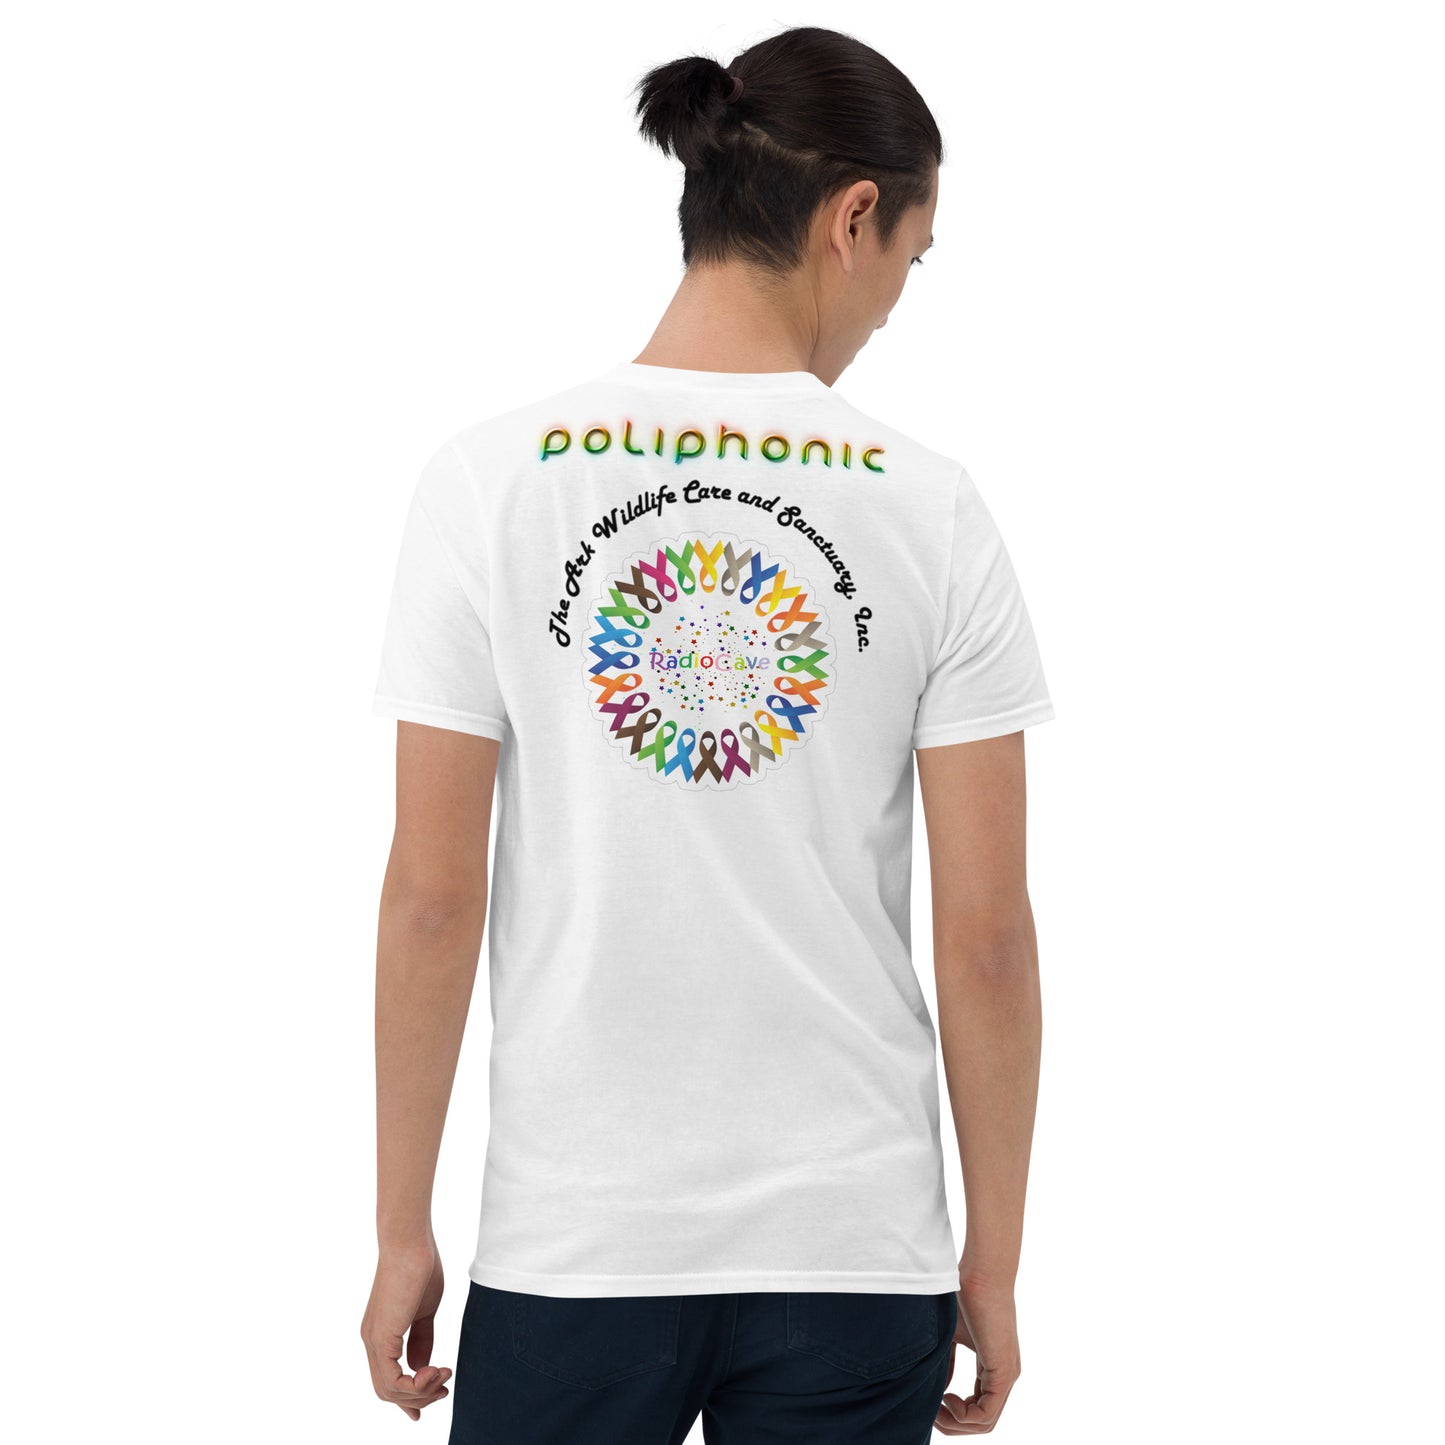 Earthdance 2023 - Poliphonic v1 - Limited Edition - Short-Sleeve Unisex T-Shirt - The Foundation of Families